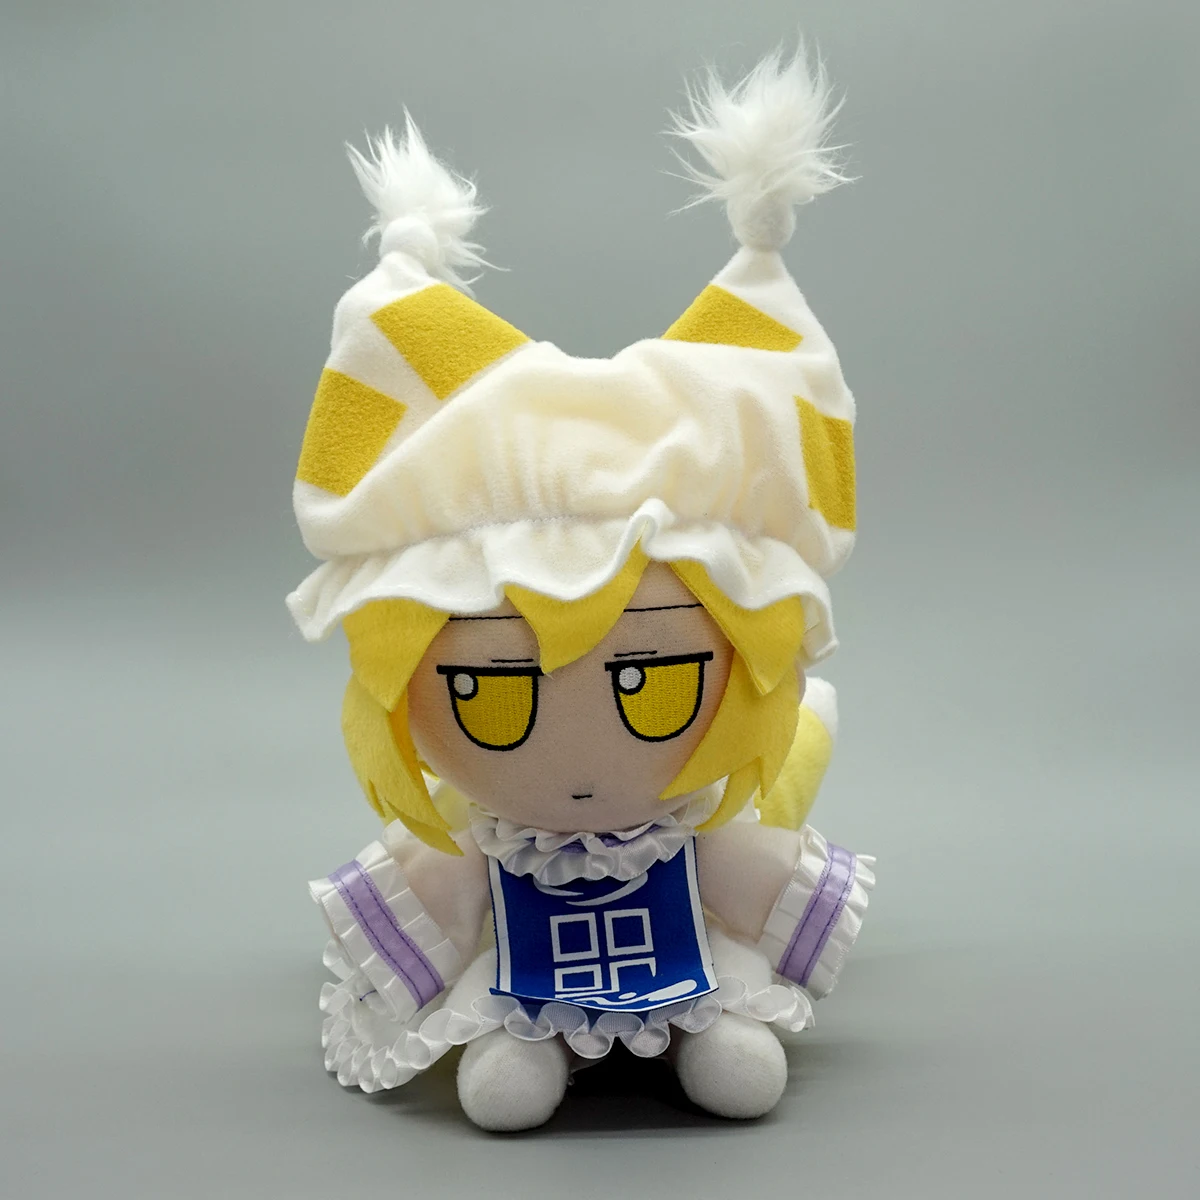 

Lovely Plush In Stock TouHou Project Yakumo Ran Doll Figure Toy X1 Kawaii Gift Shipping In 2 Days